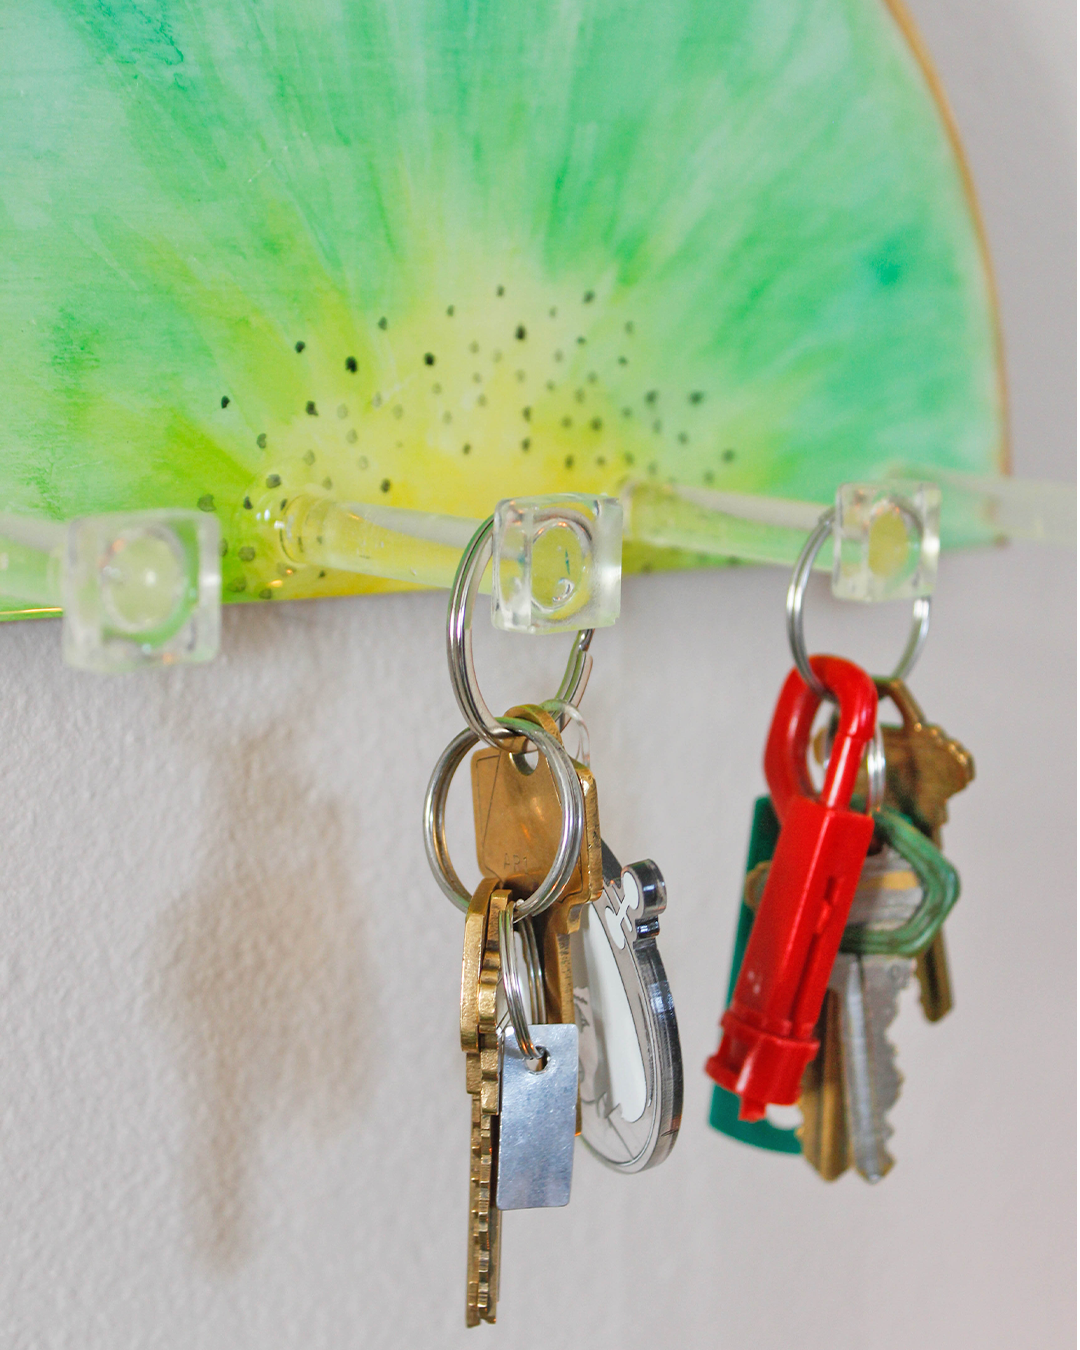 Artistic wooden key holder with a kiwi fruit theme, blending practicality with playful design for home organization.